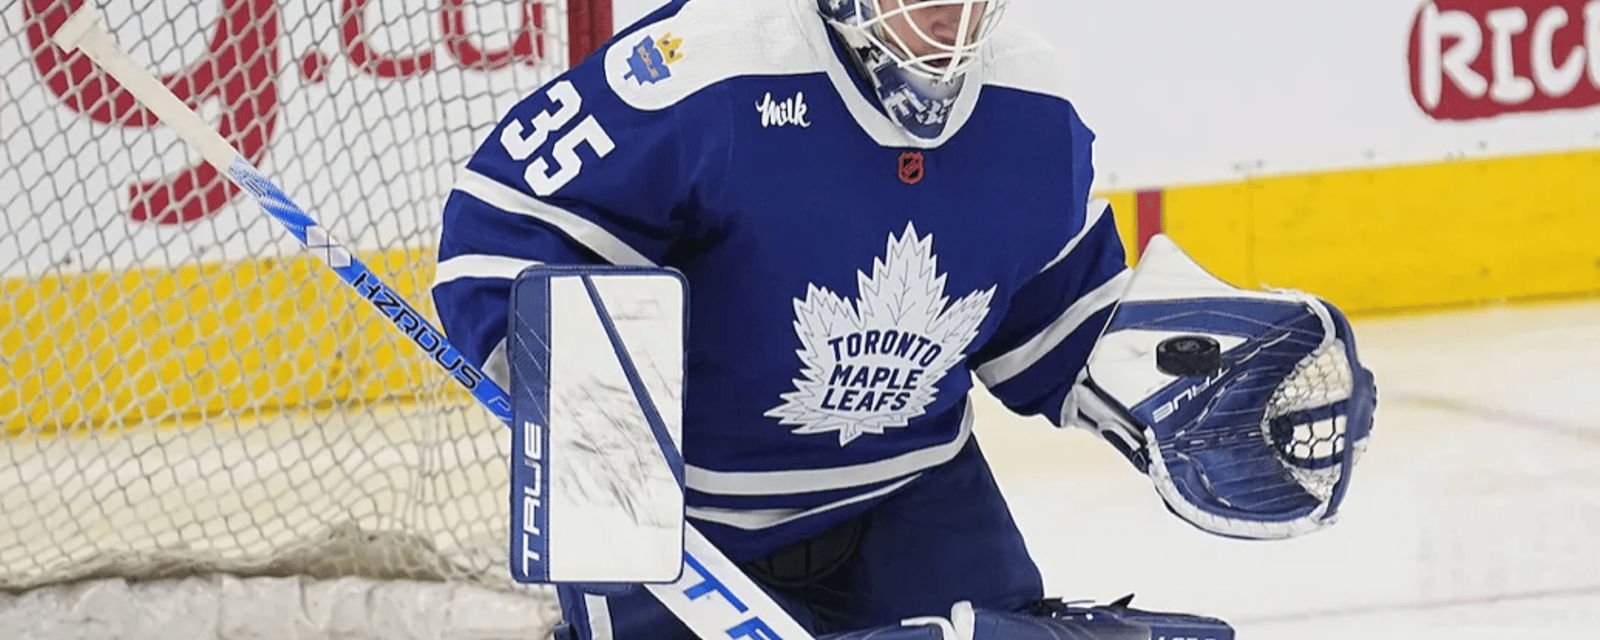 Ilya Samsonov honors Leafs legend with jaw-dropping mask 